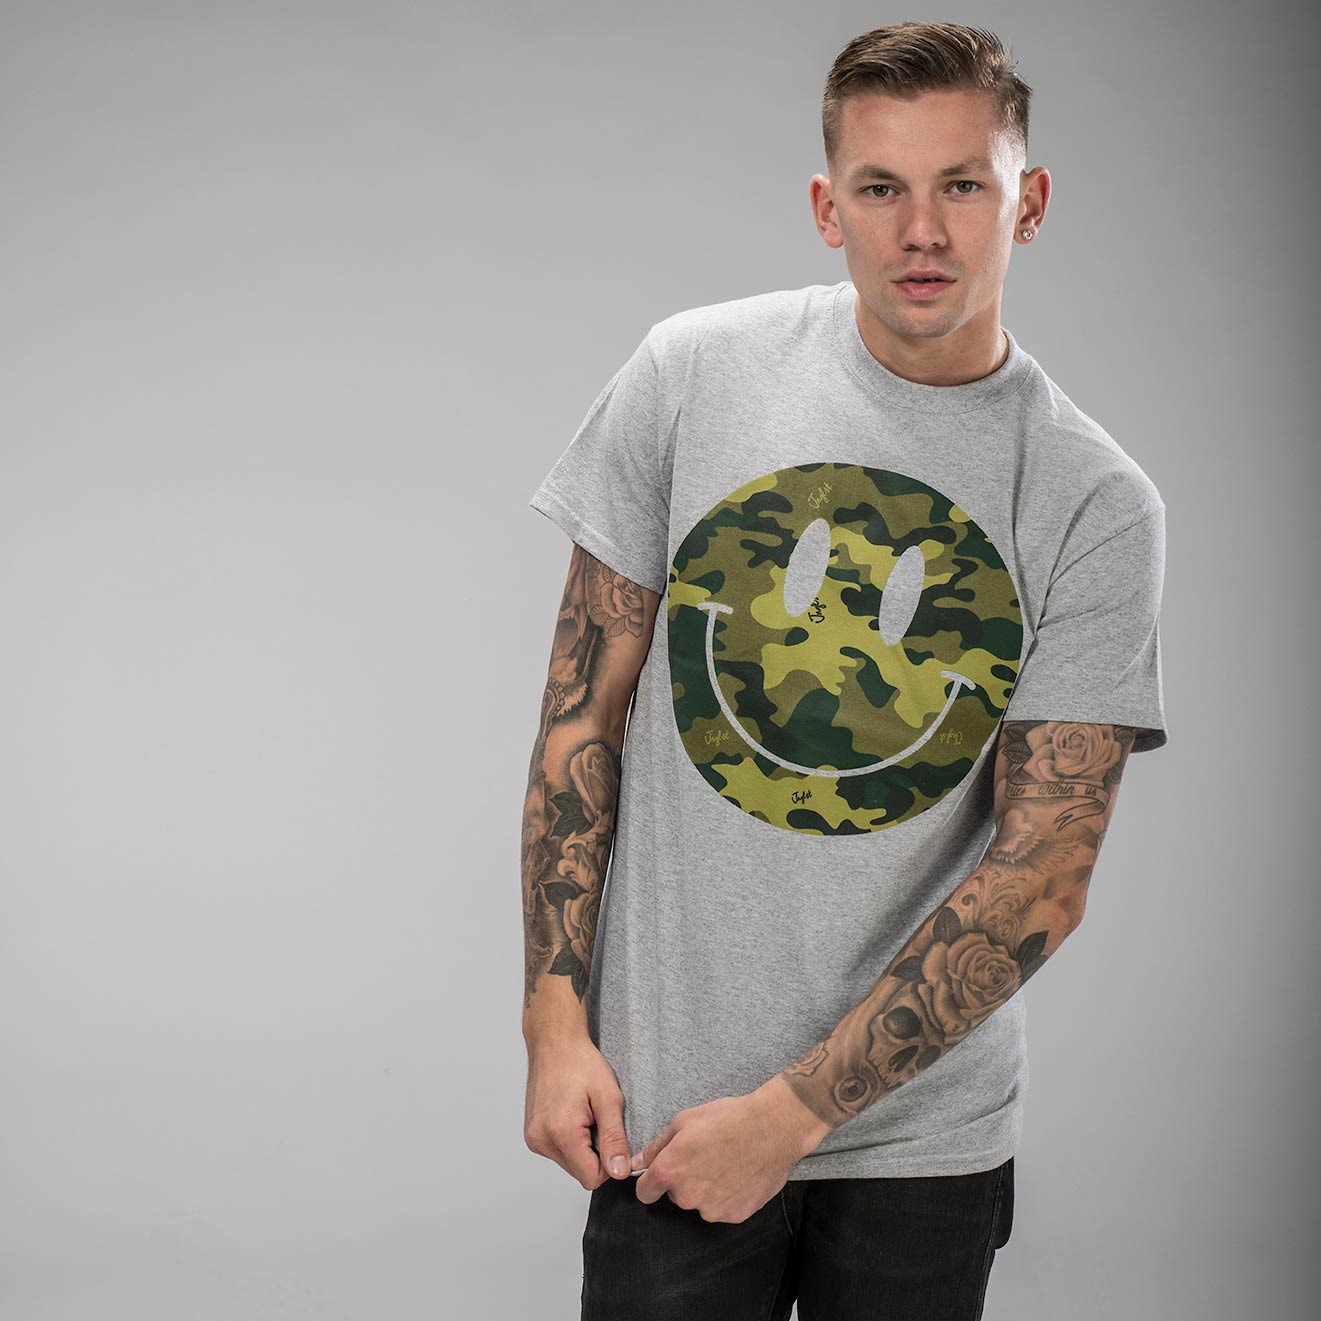 Grey T-Shirt with Camo Smiley Raver Clothing